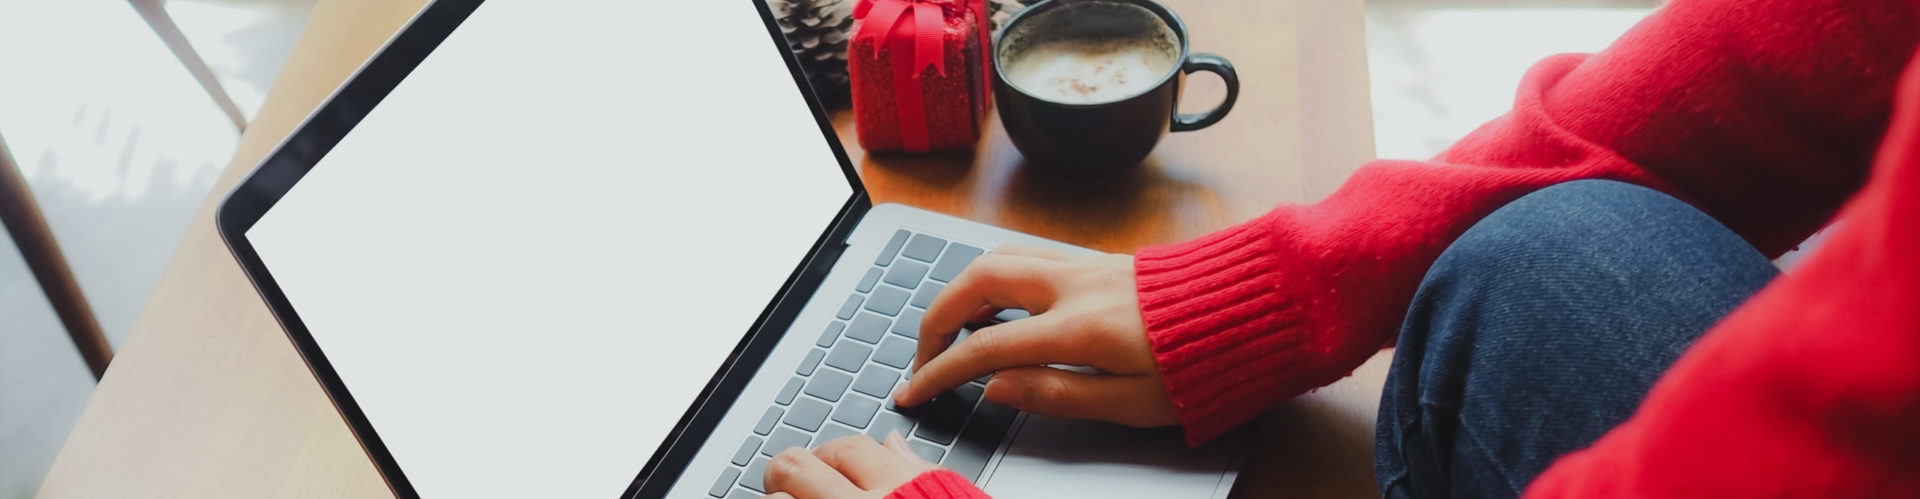 2022 holiday ecommerce strategy - person in sweater shopping on computer with holiday items nearby